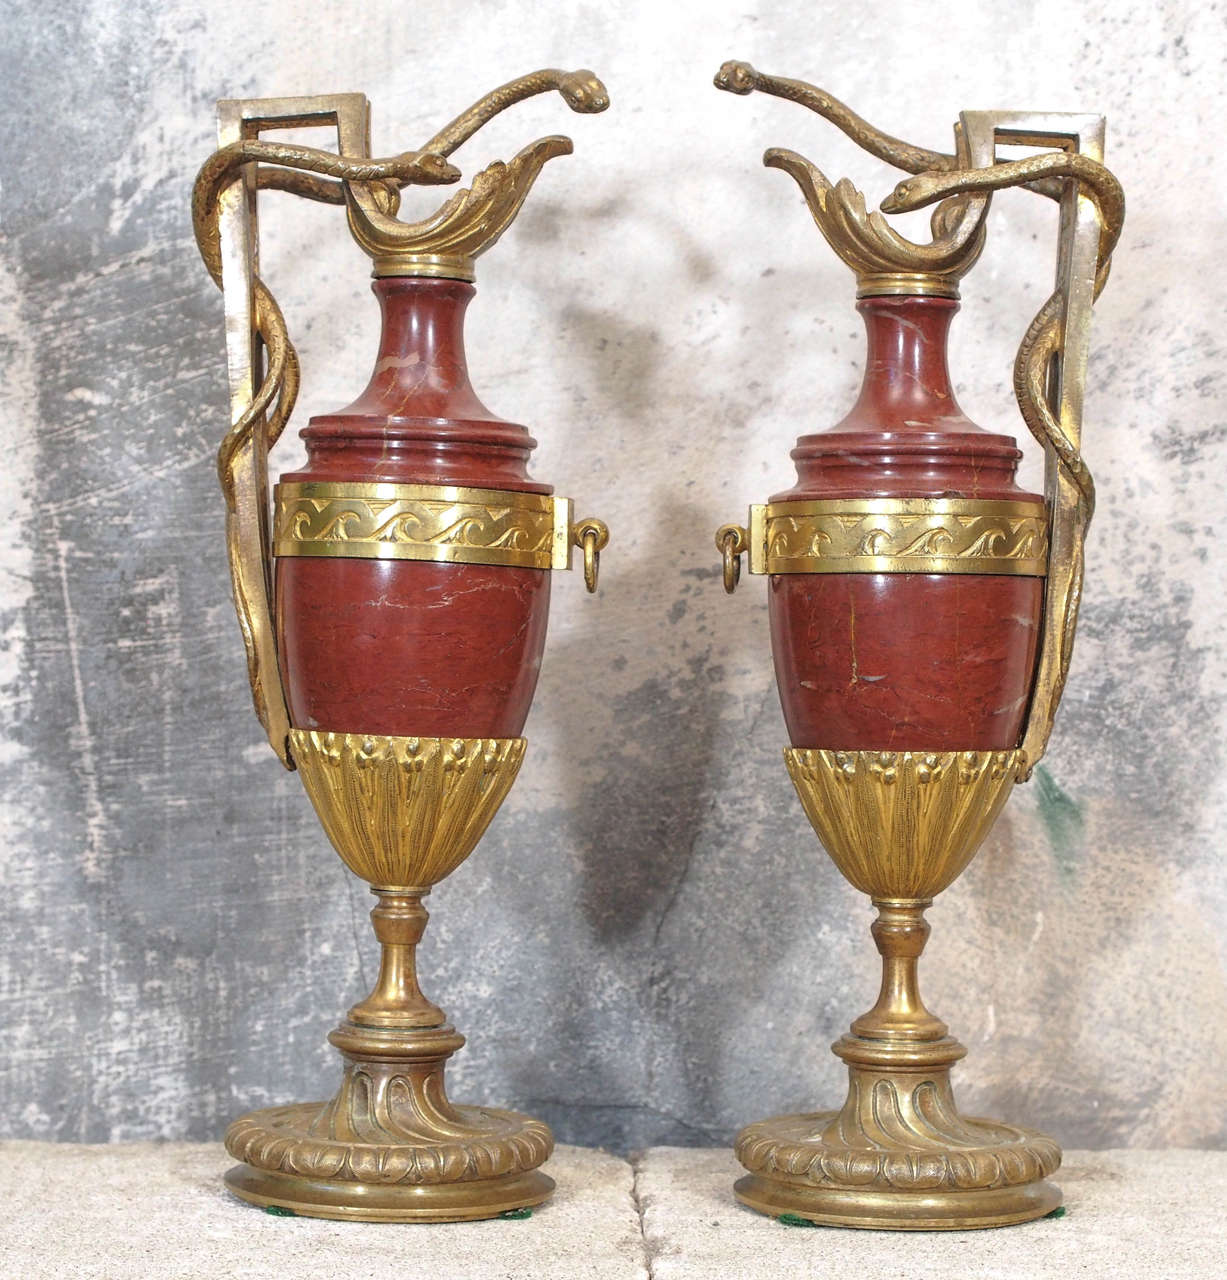 Pair of 19th century French neo-classical style 